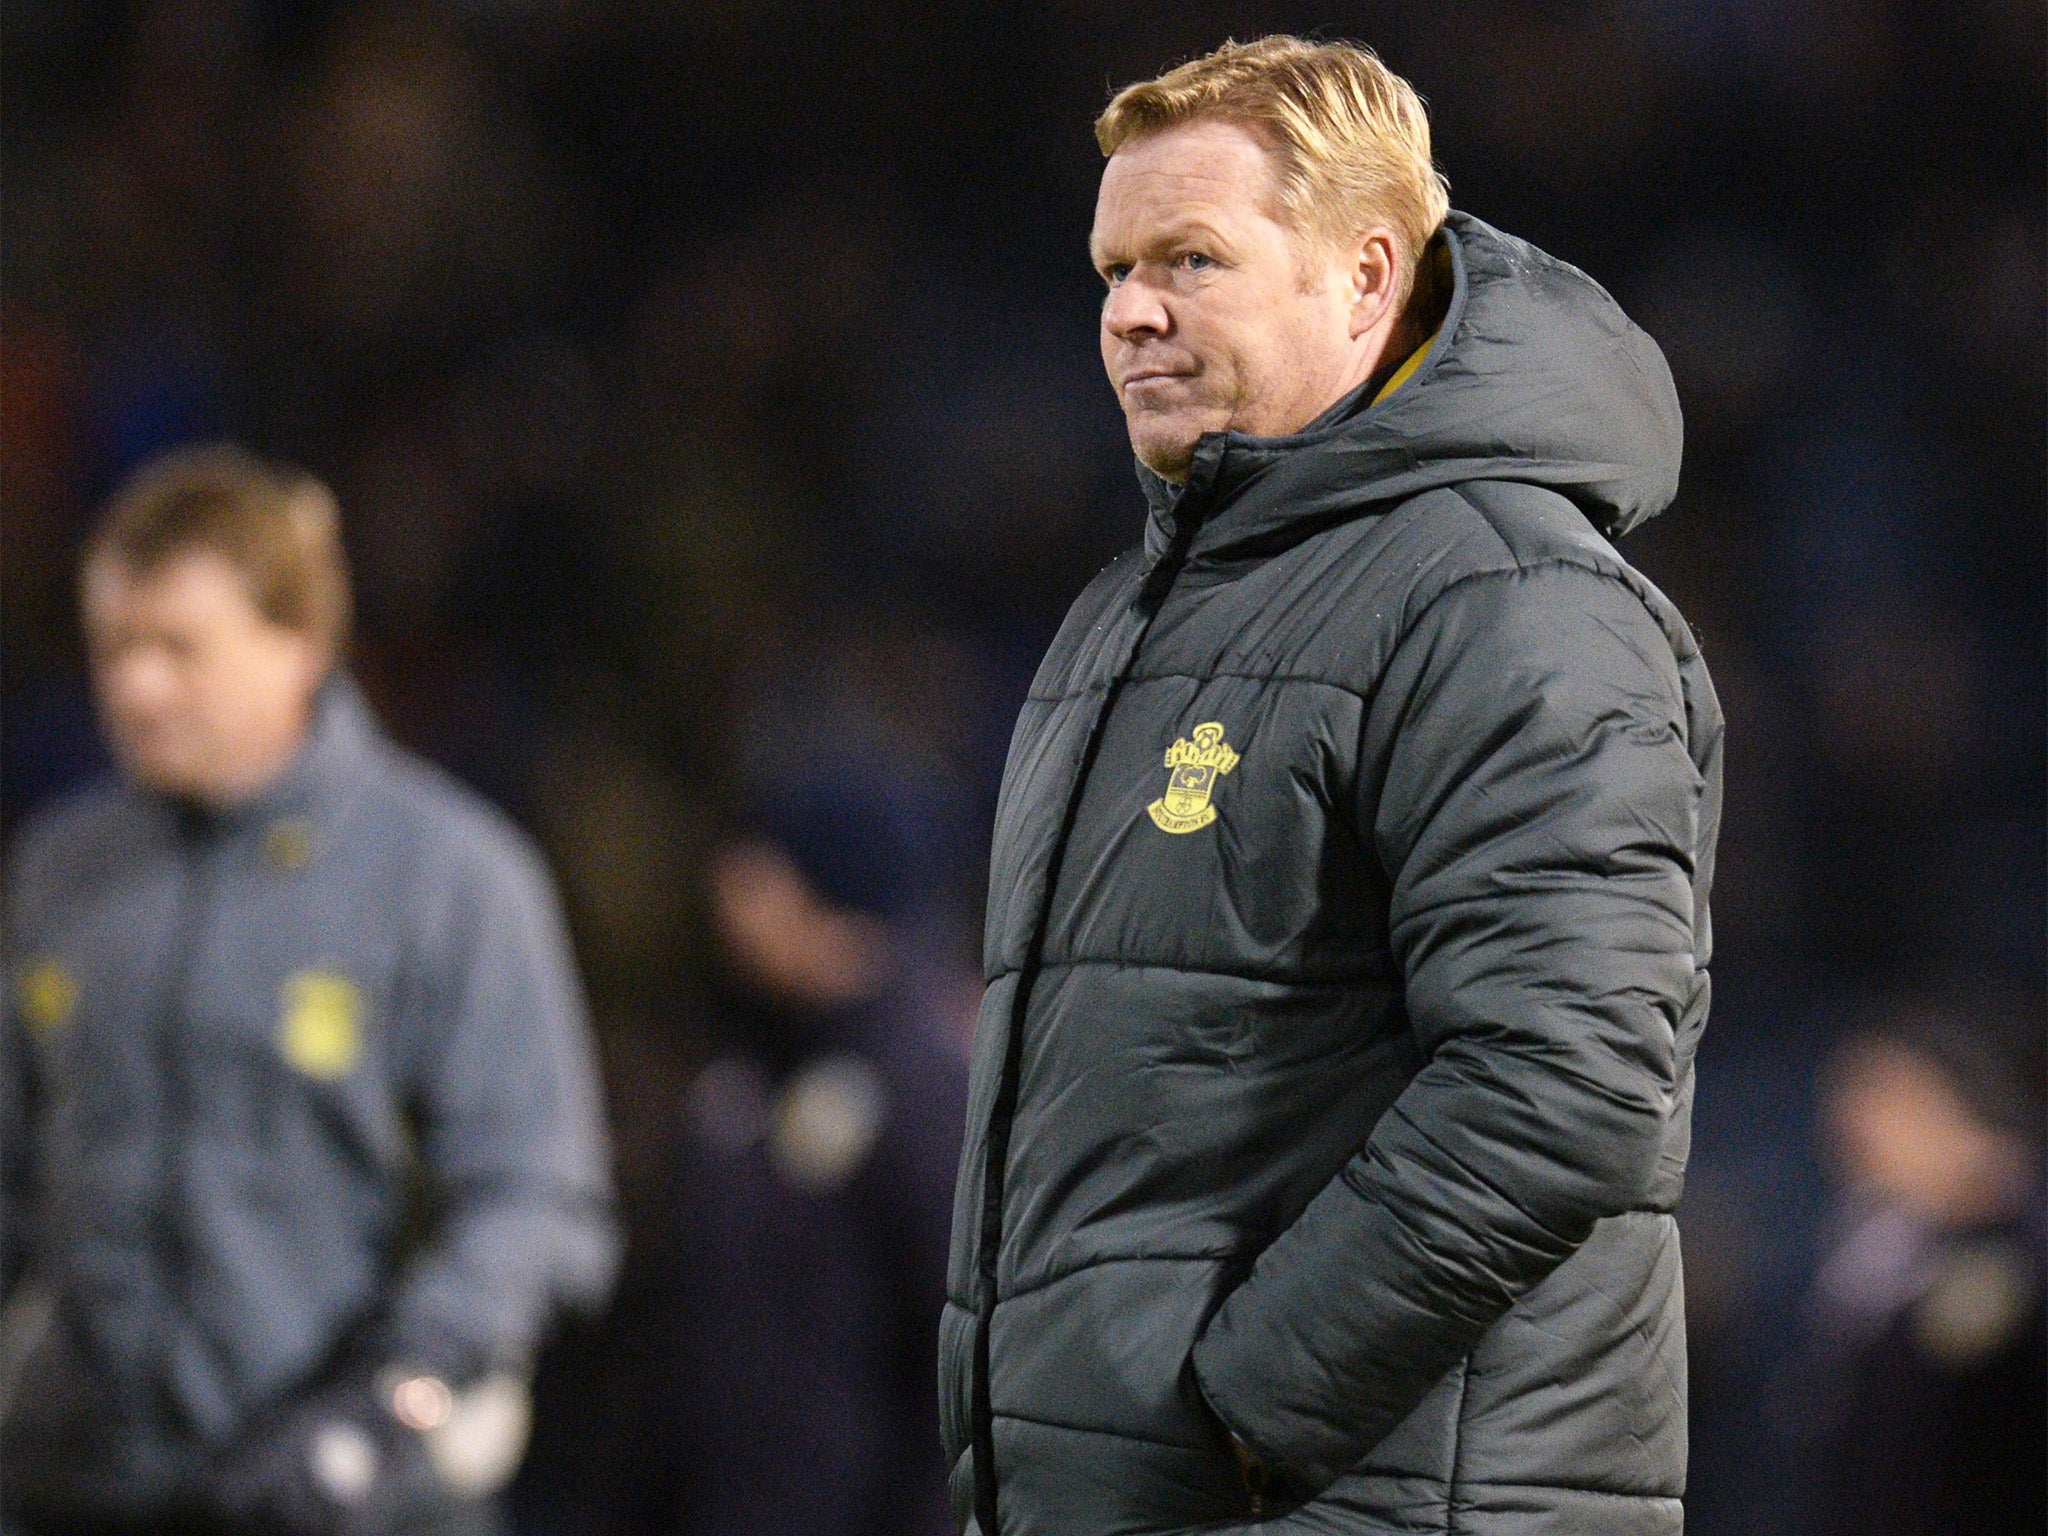 Southampton Ronald Koeman looks on from the touchline